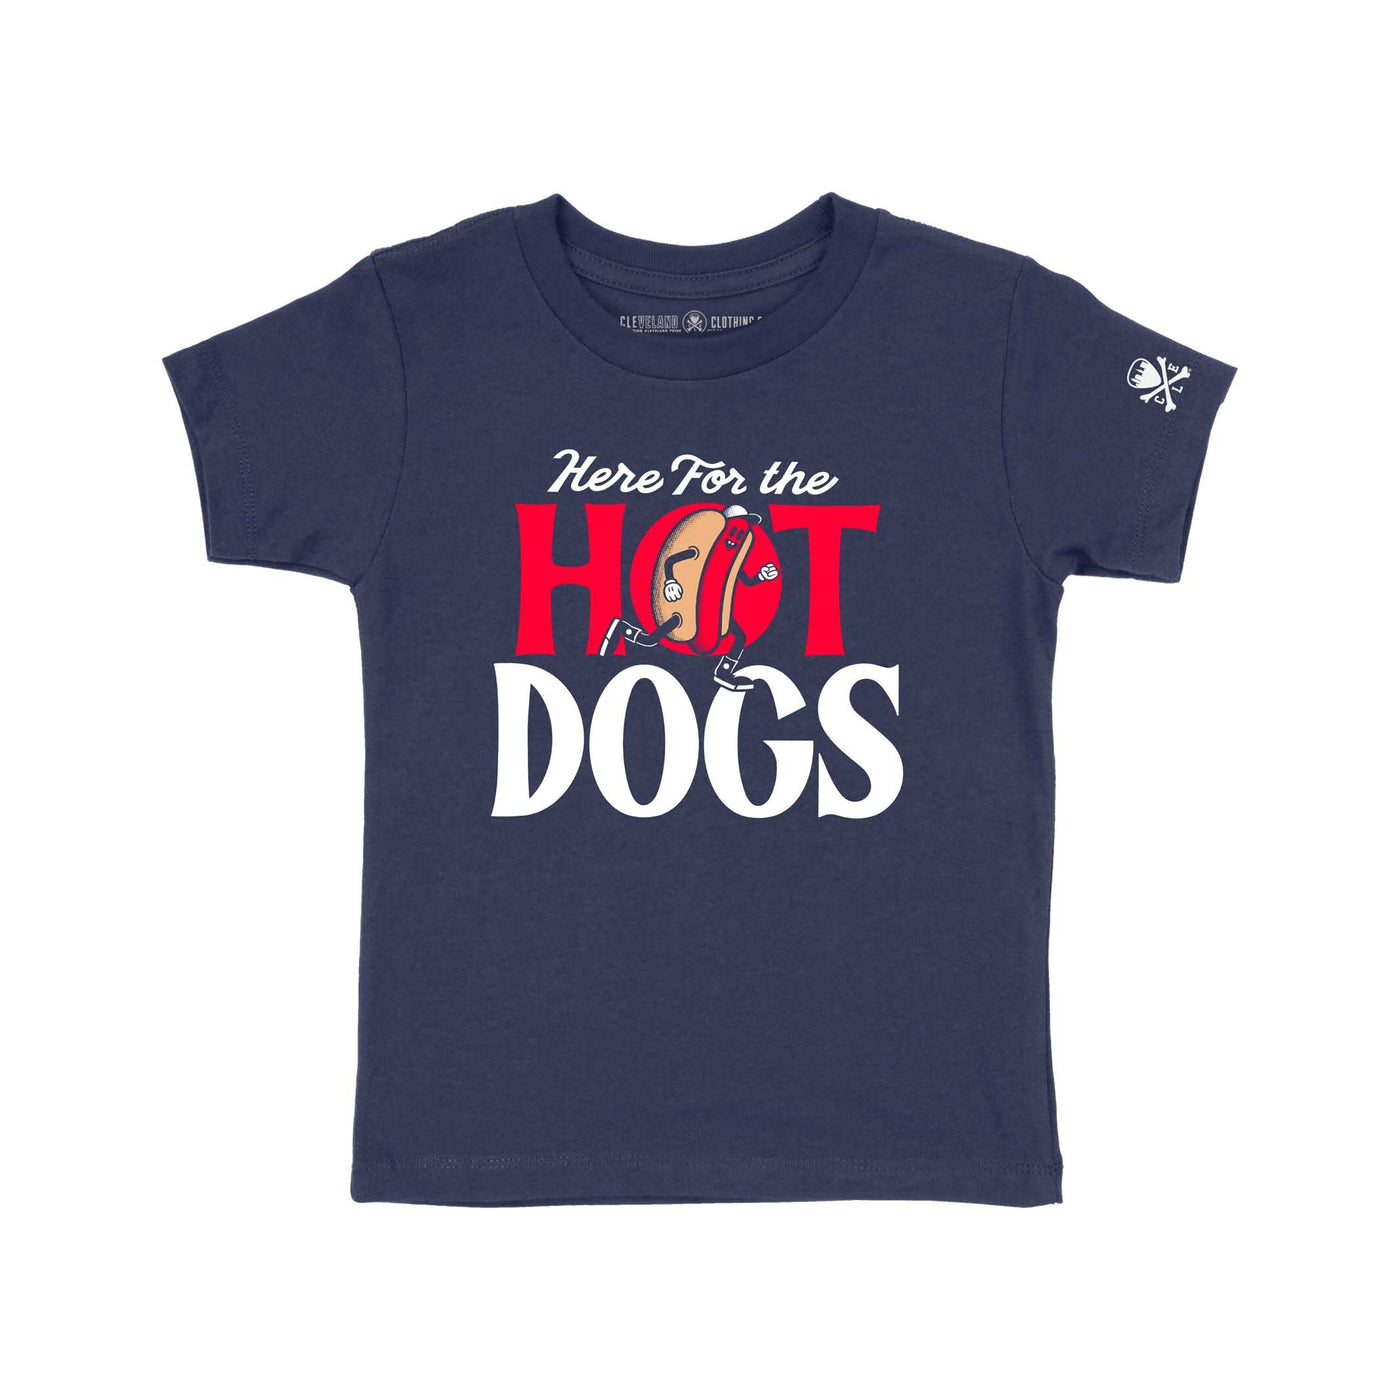 Here for the Hot Dogs - Toddler Crew T-Shirt